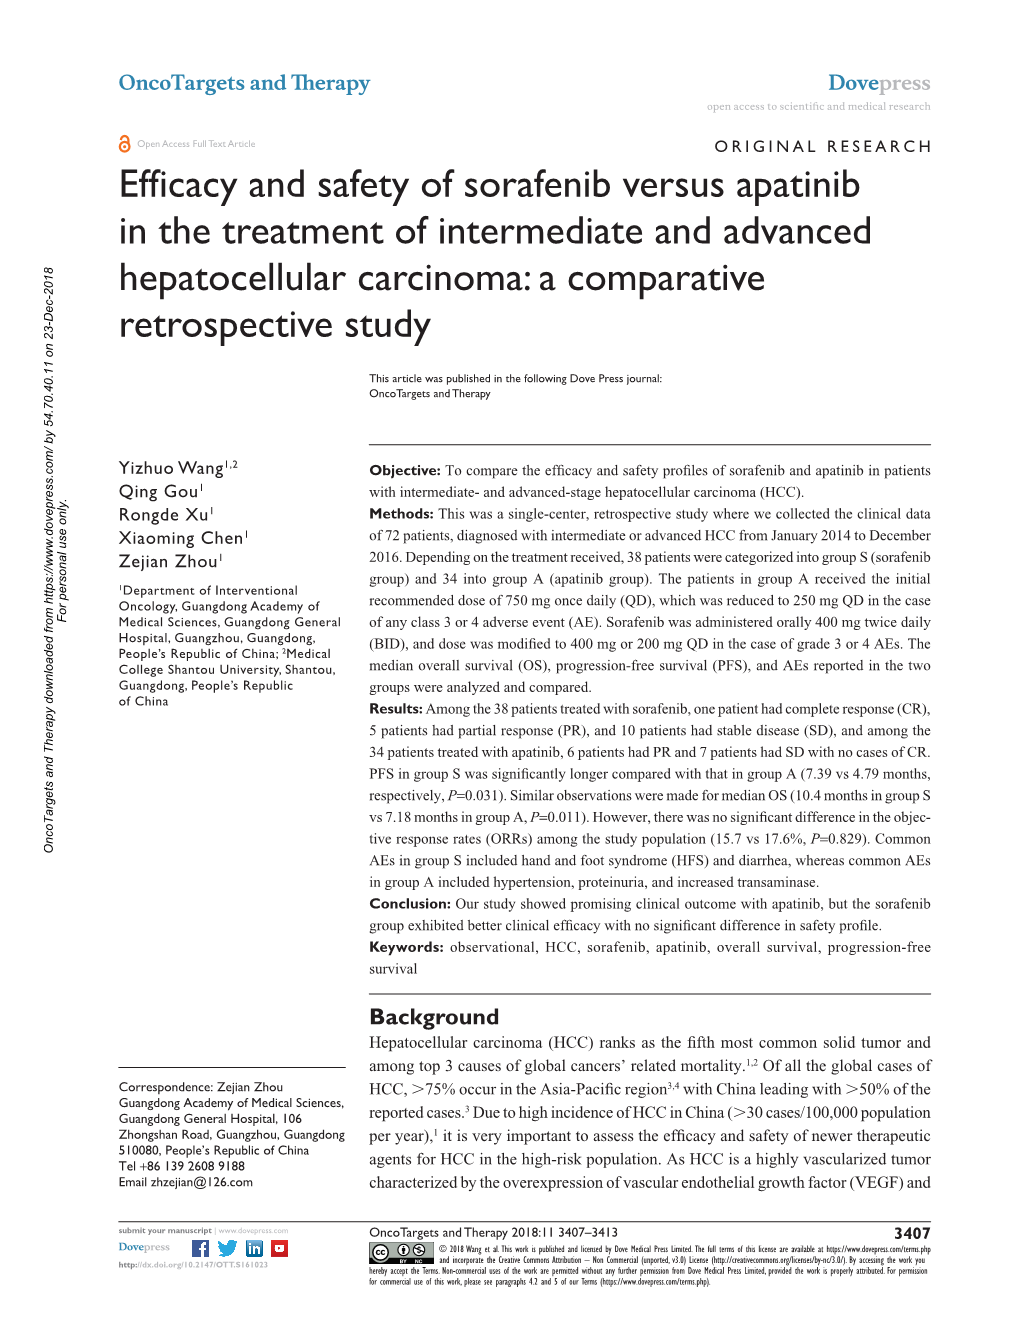 Efficacy and Safety of Sorafenib Versus Apatinib in the Treatment of Intermediate and Advanced Hepatocellular Carcinoma: a Comparative Retrospective Study